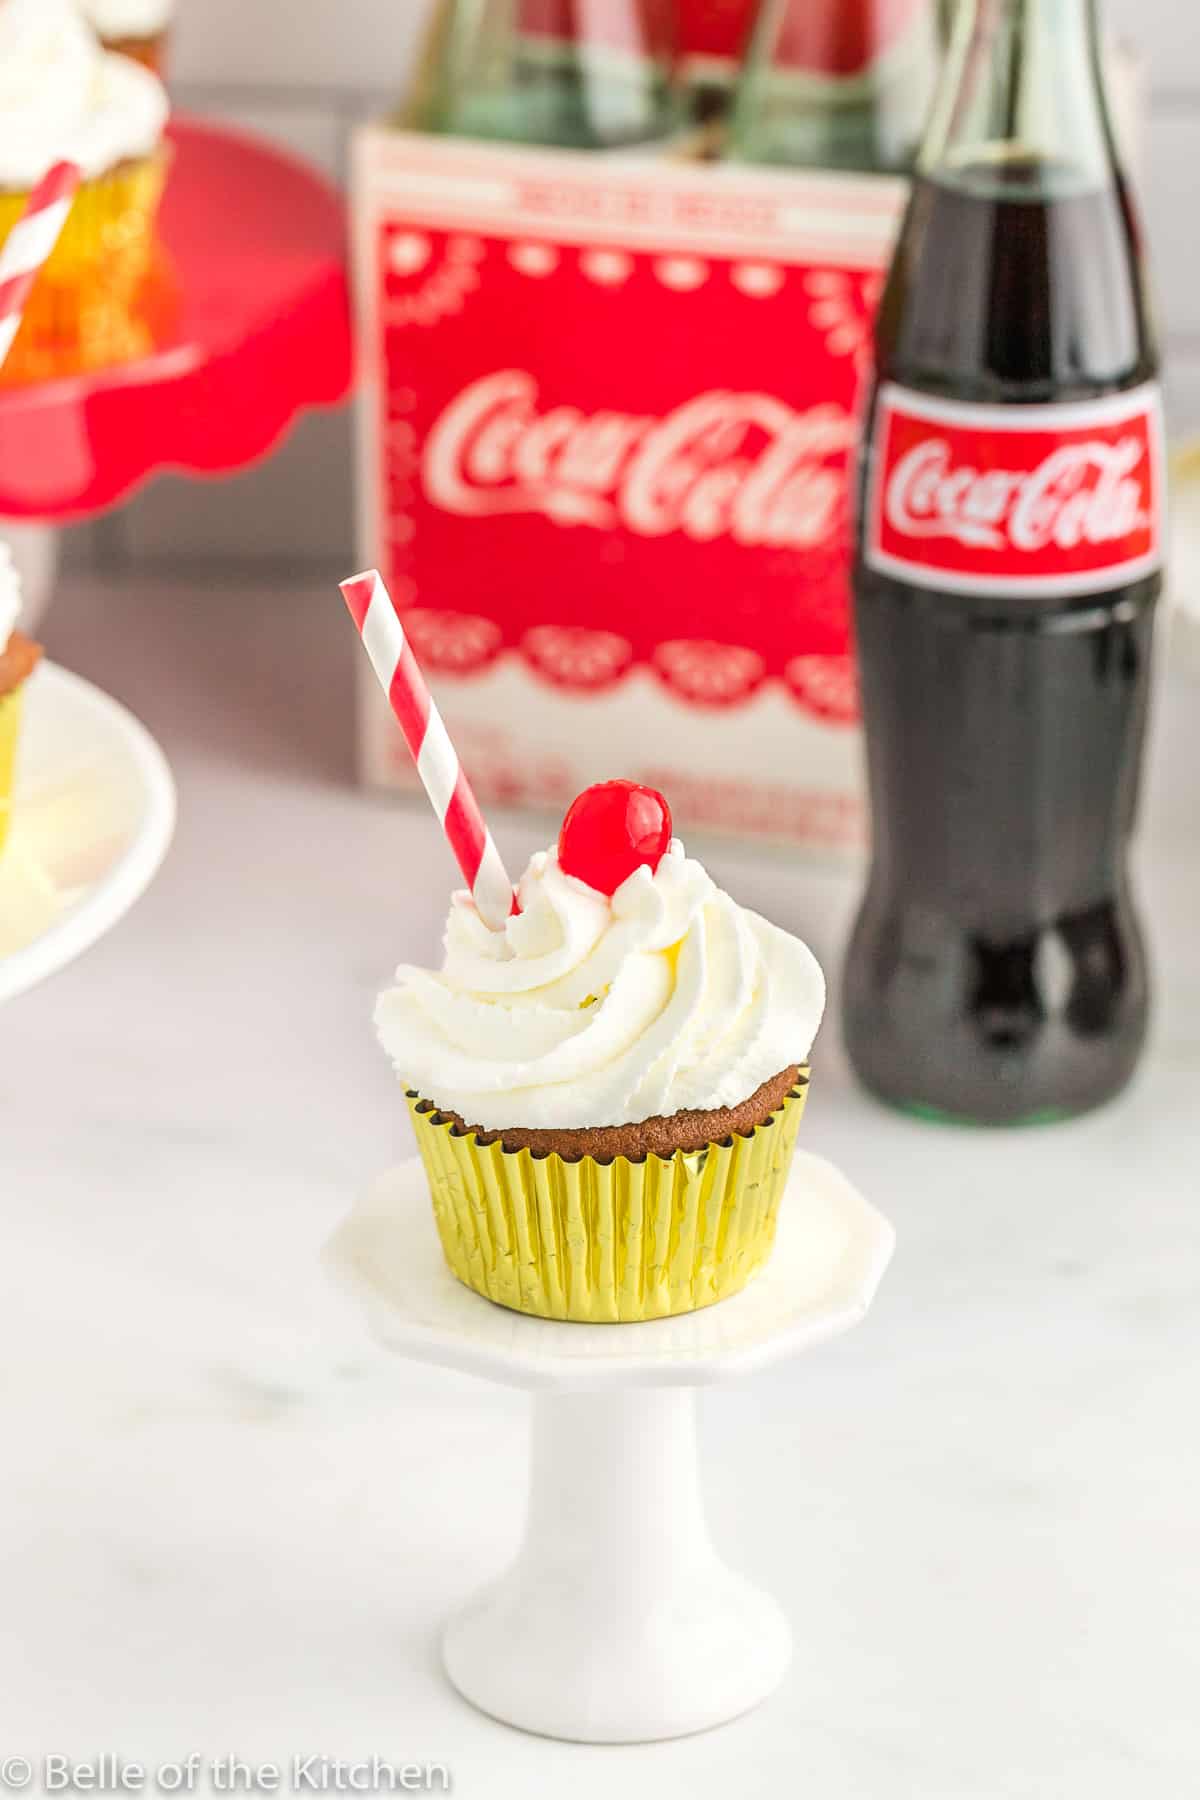 one cupcake on a cake stand next to a coke bottle